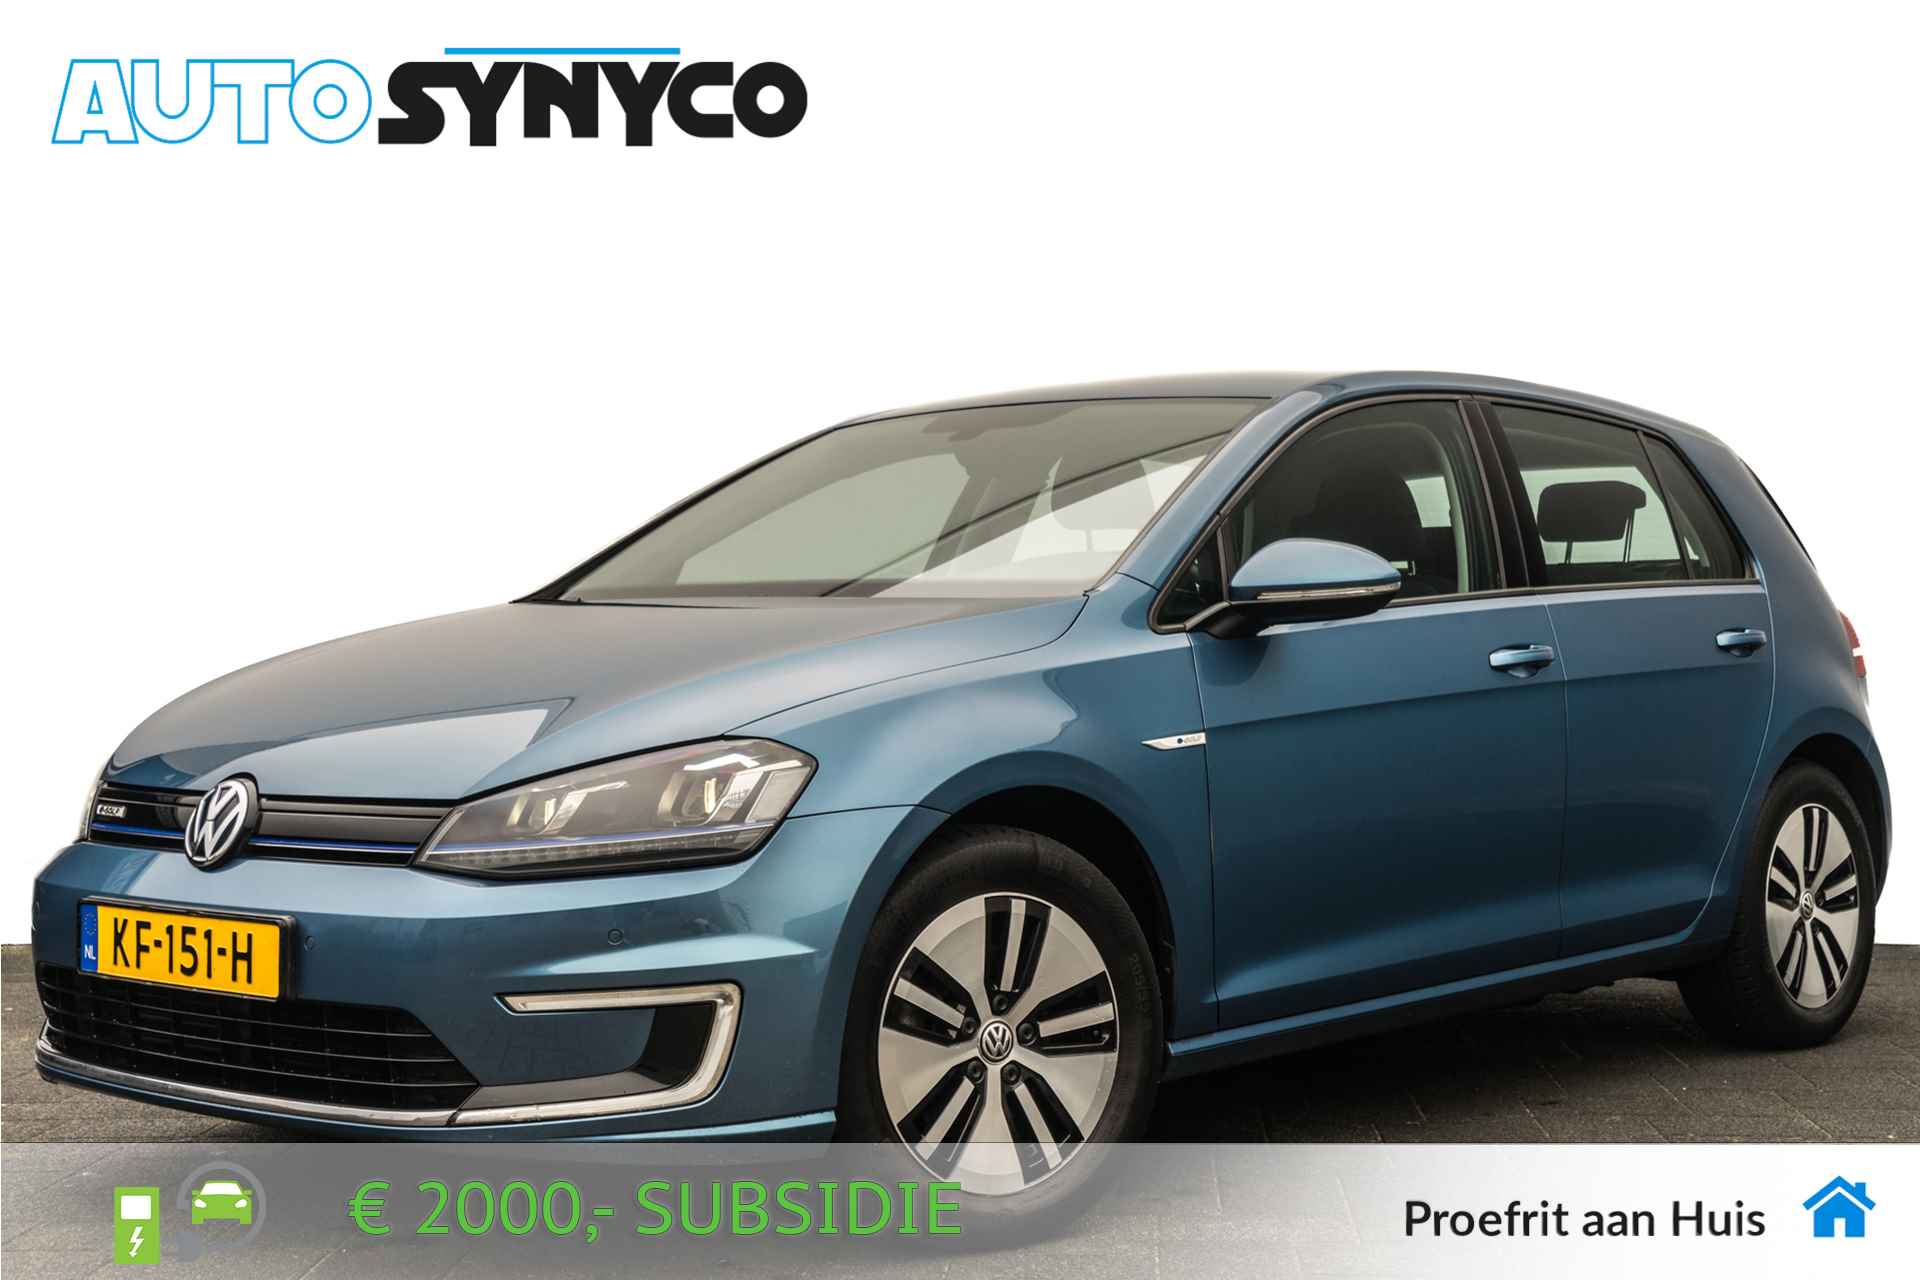 Volkswagen e-Golf e-Golf | 24 Kwh | LED | PDC | 2.000,- Subsidie | Navigatie | Climate Control - 1/38